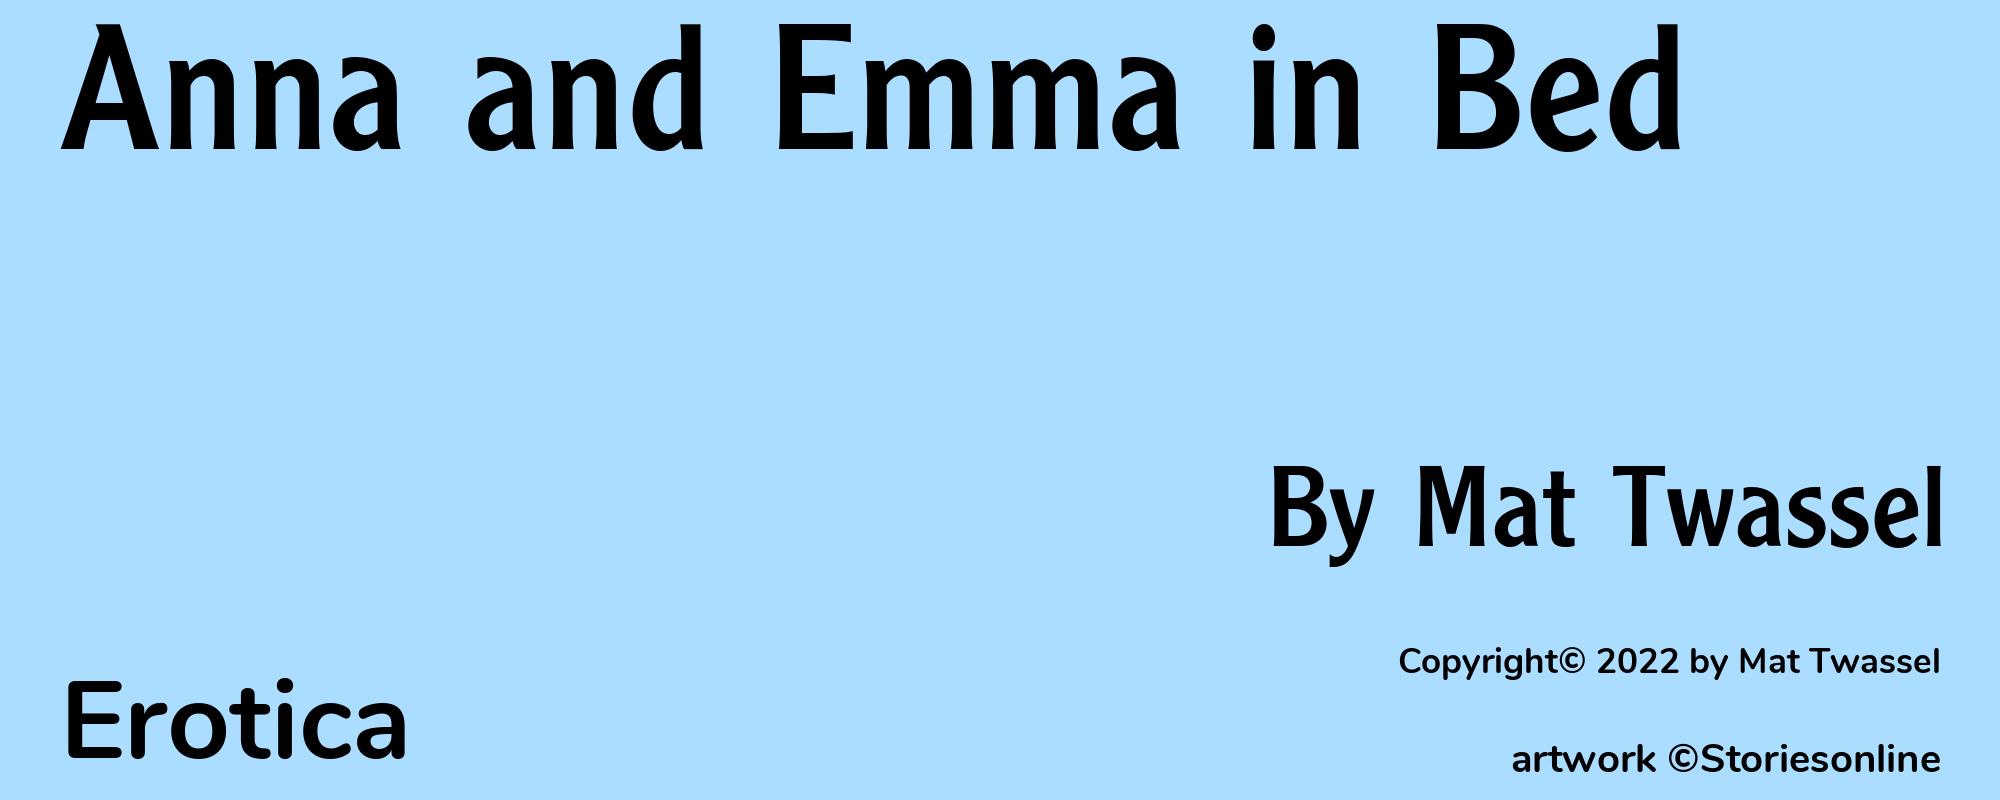 Anna and Emma in Bed - Cover